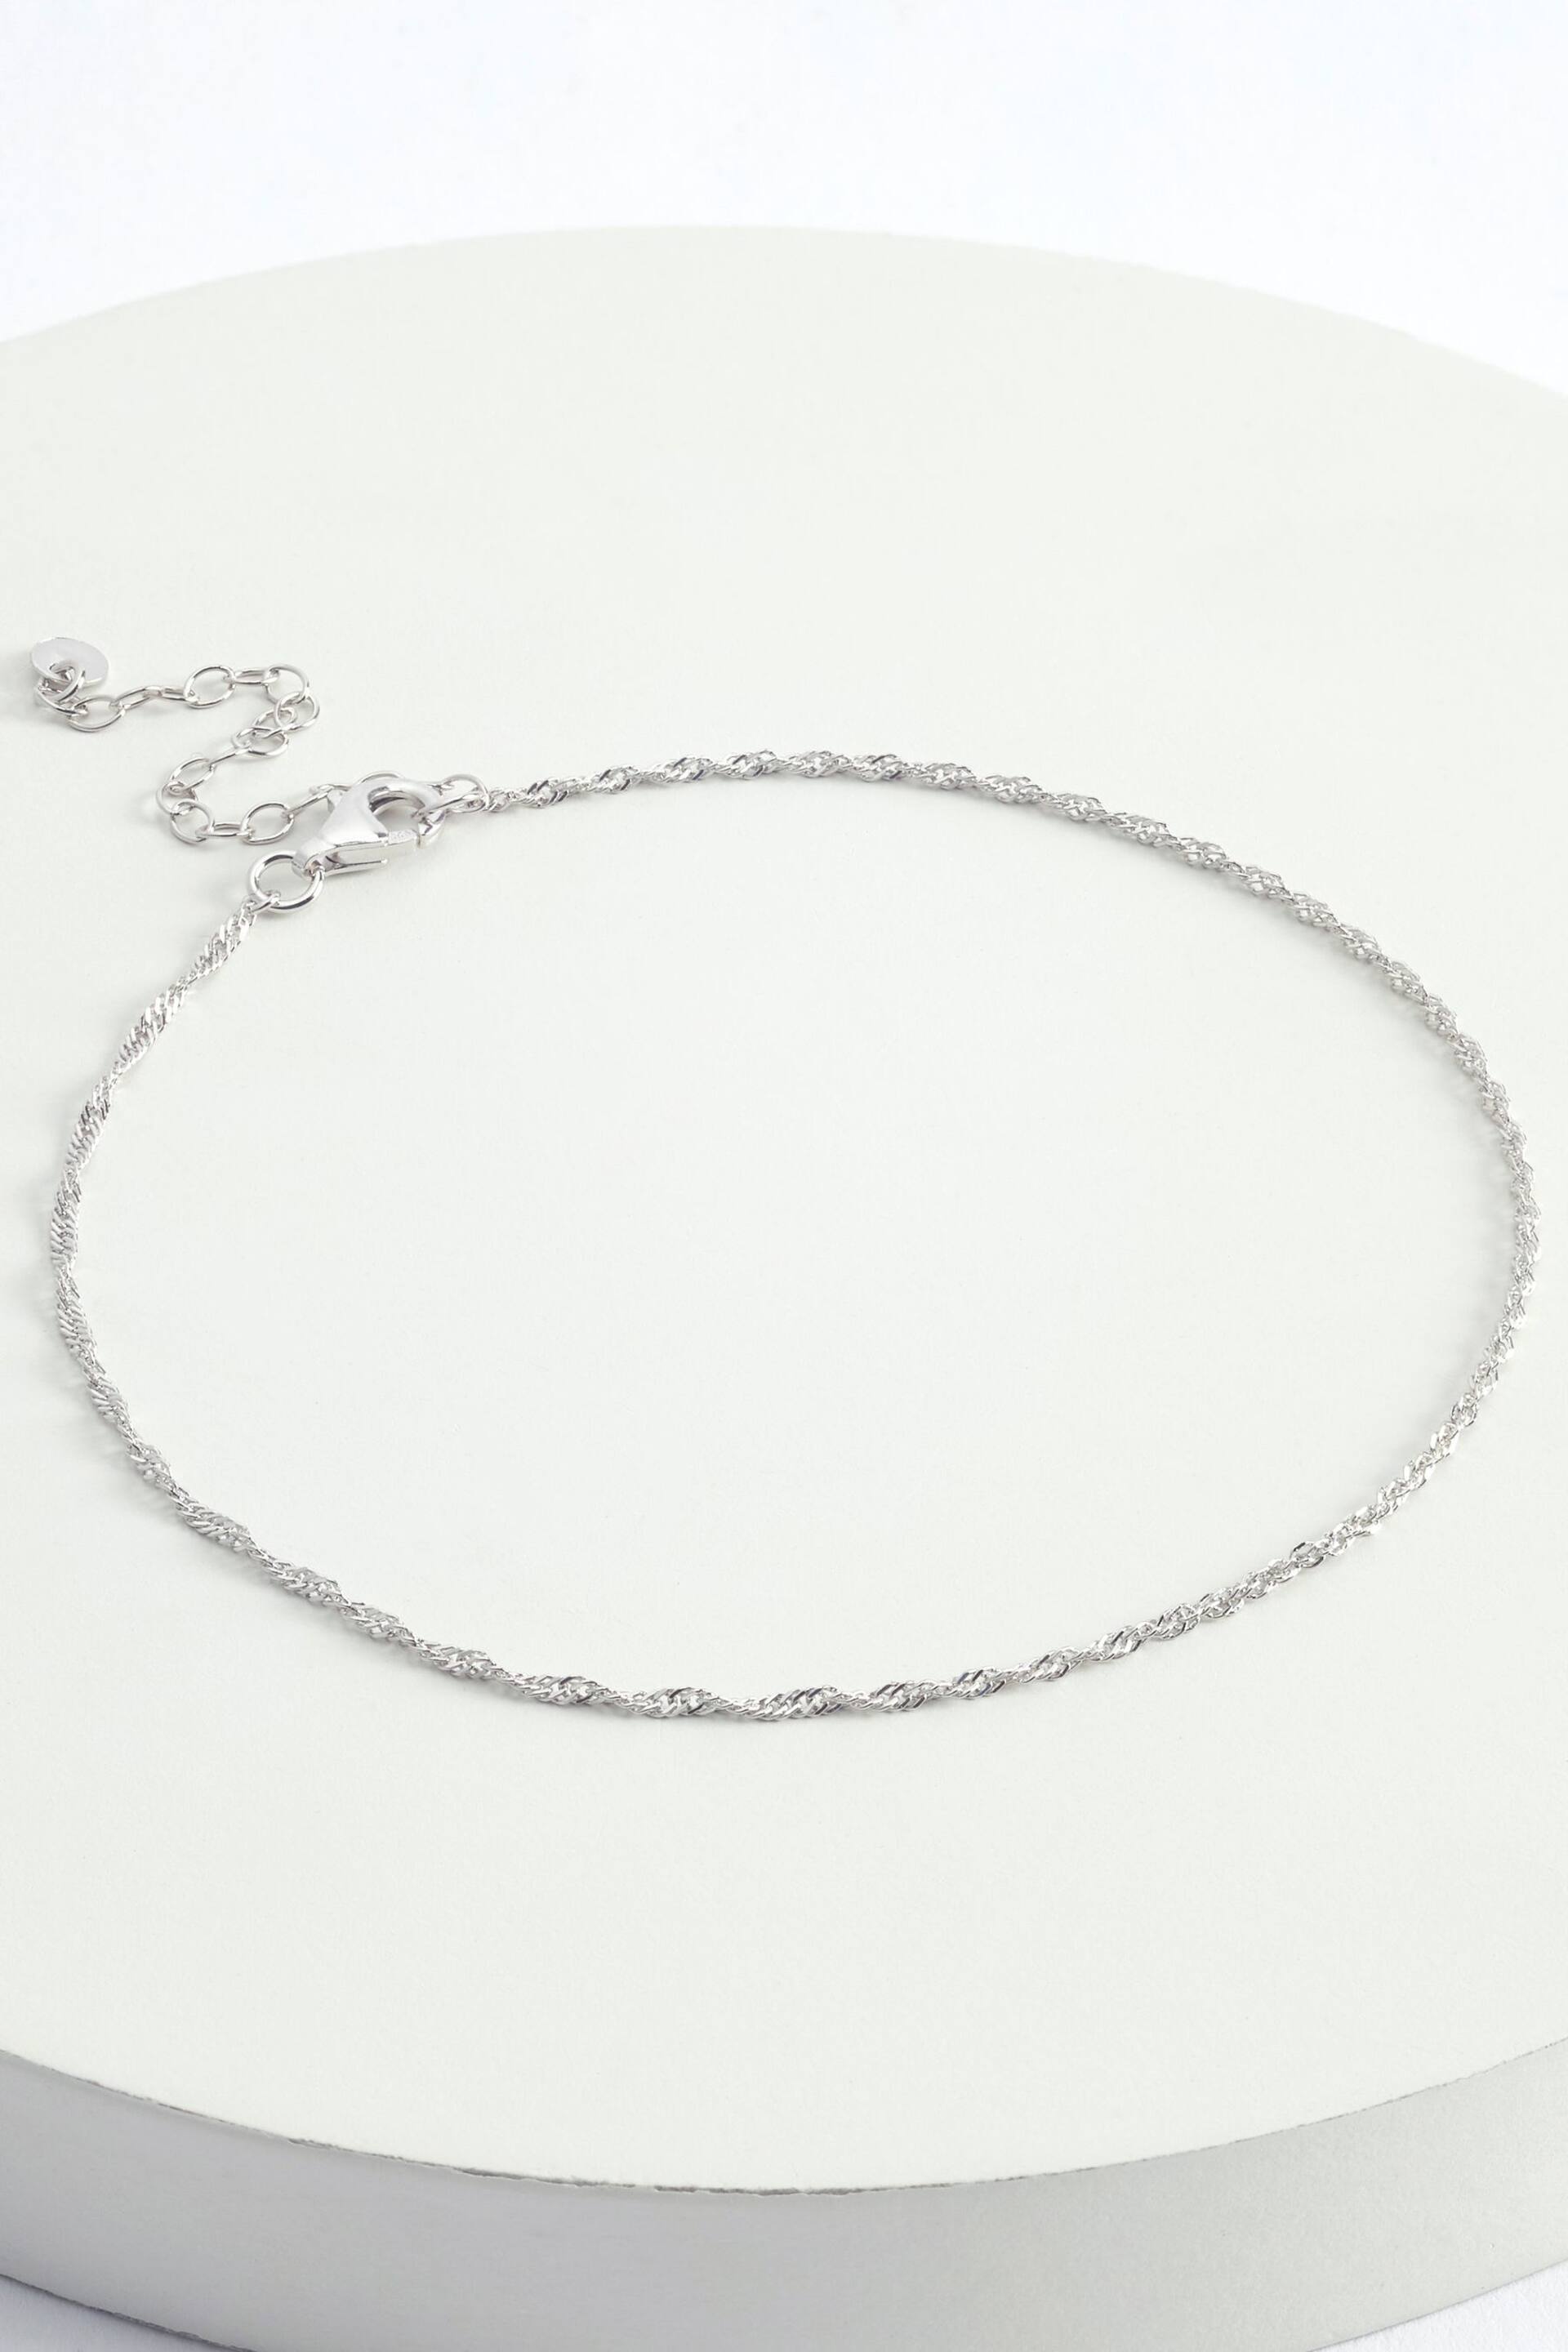 Sterling Silver Twisted Chain Anklet - Image 1 of 10